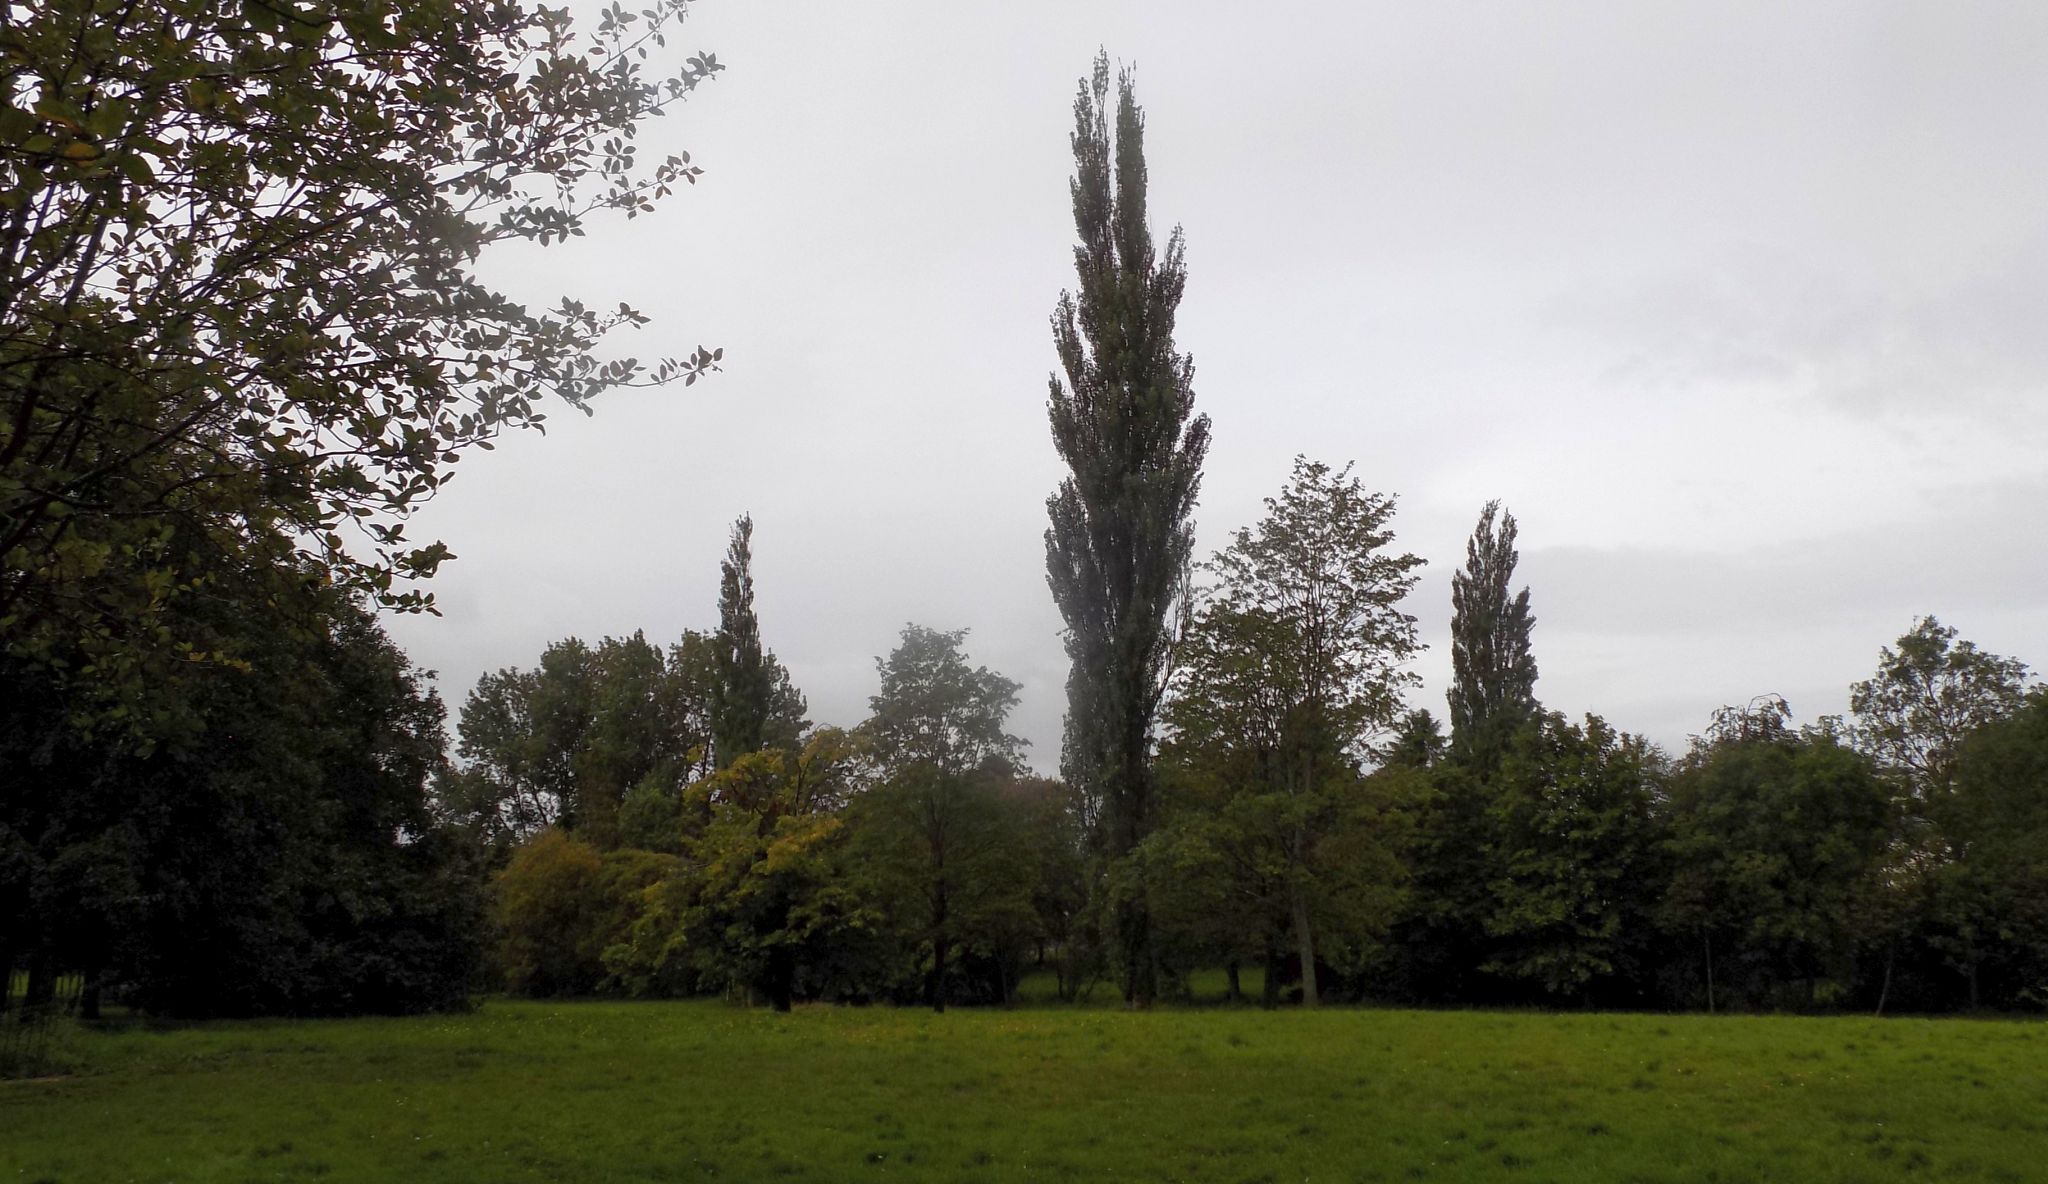 Trees and meadow in Knightswood Park